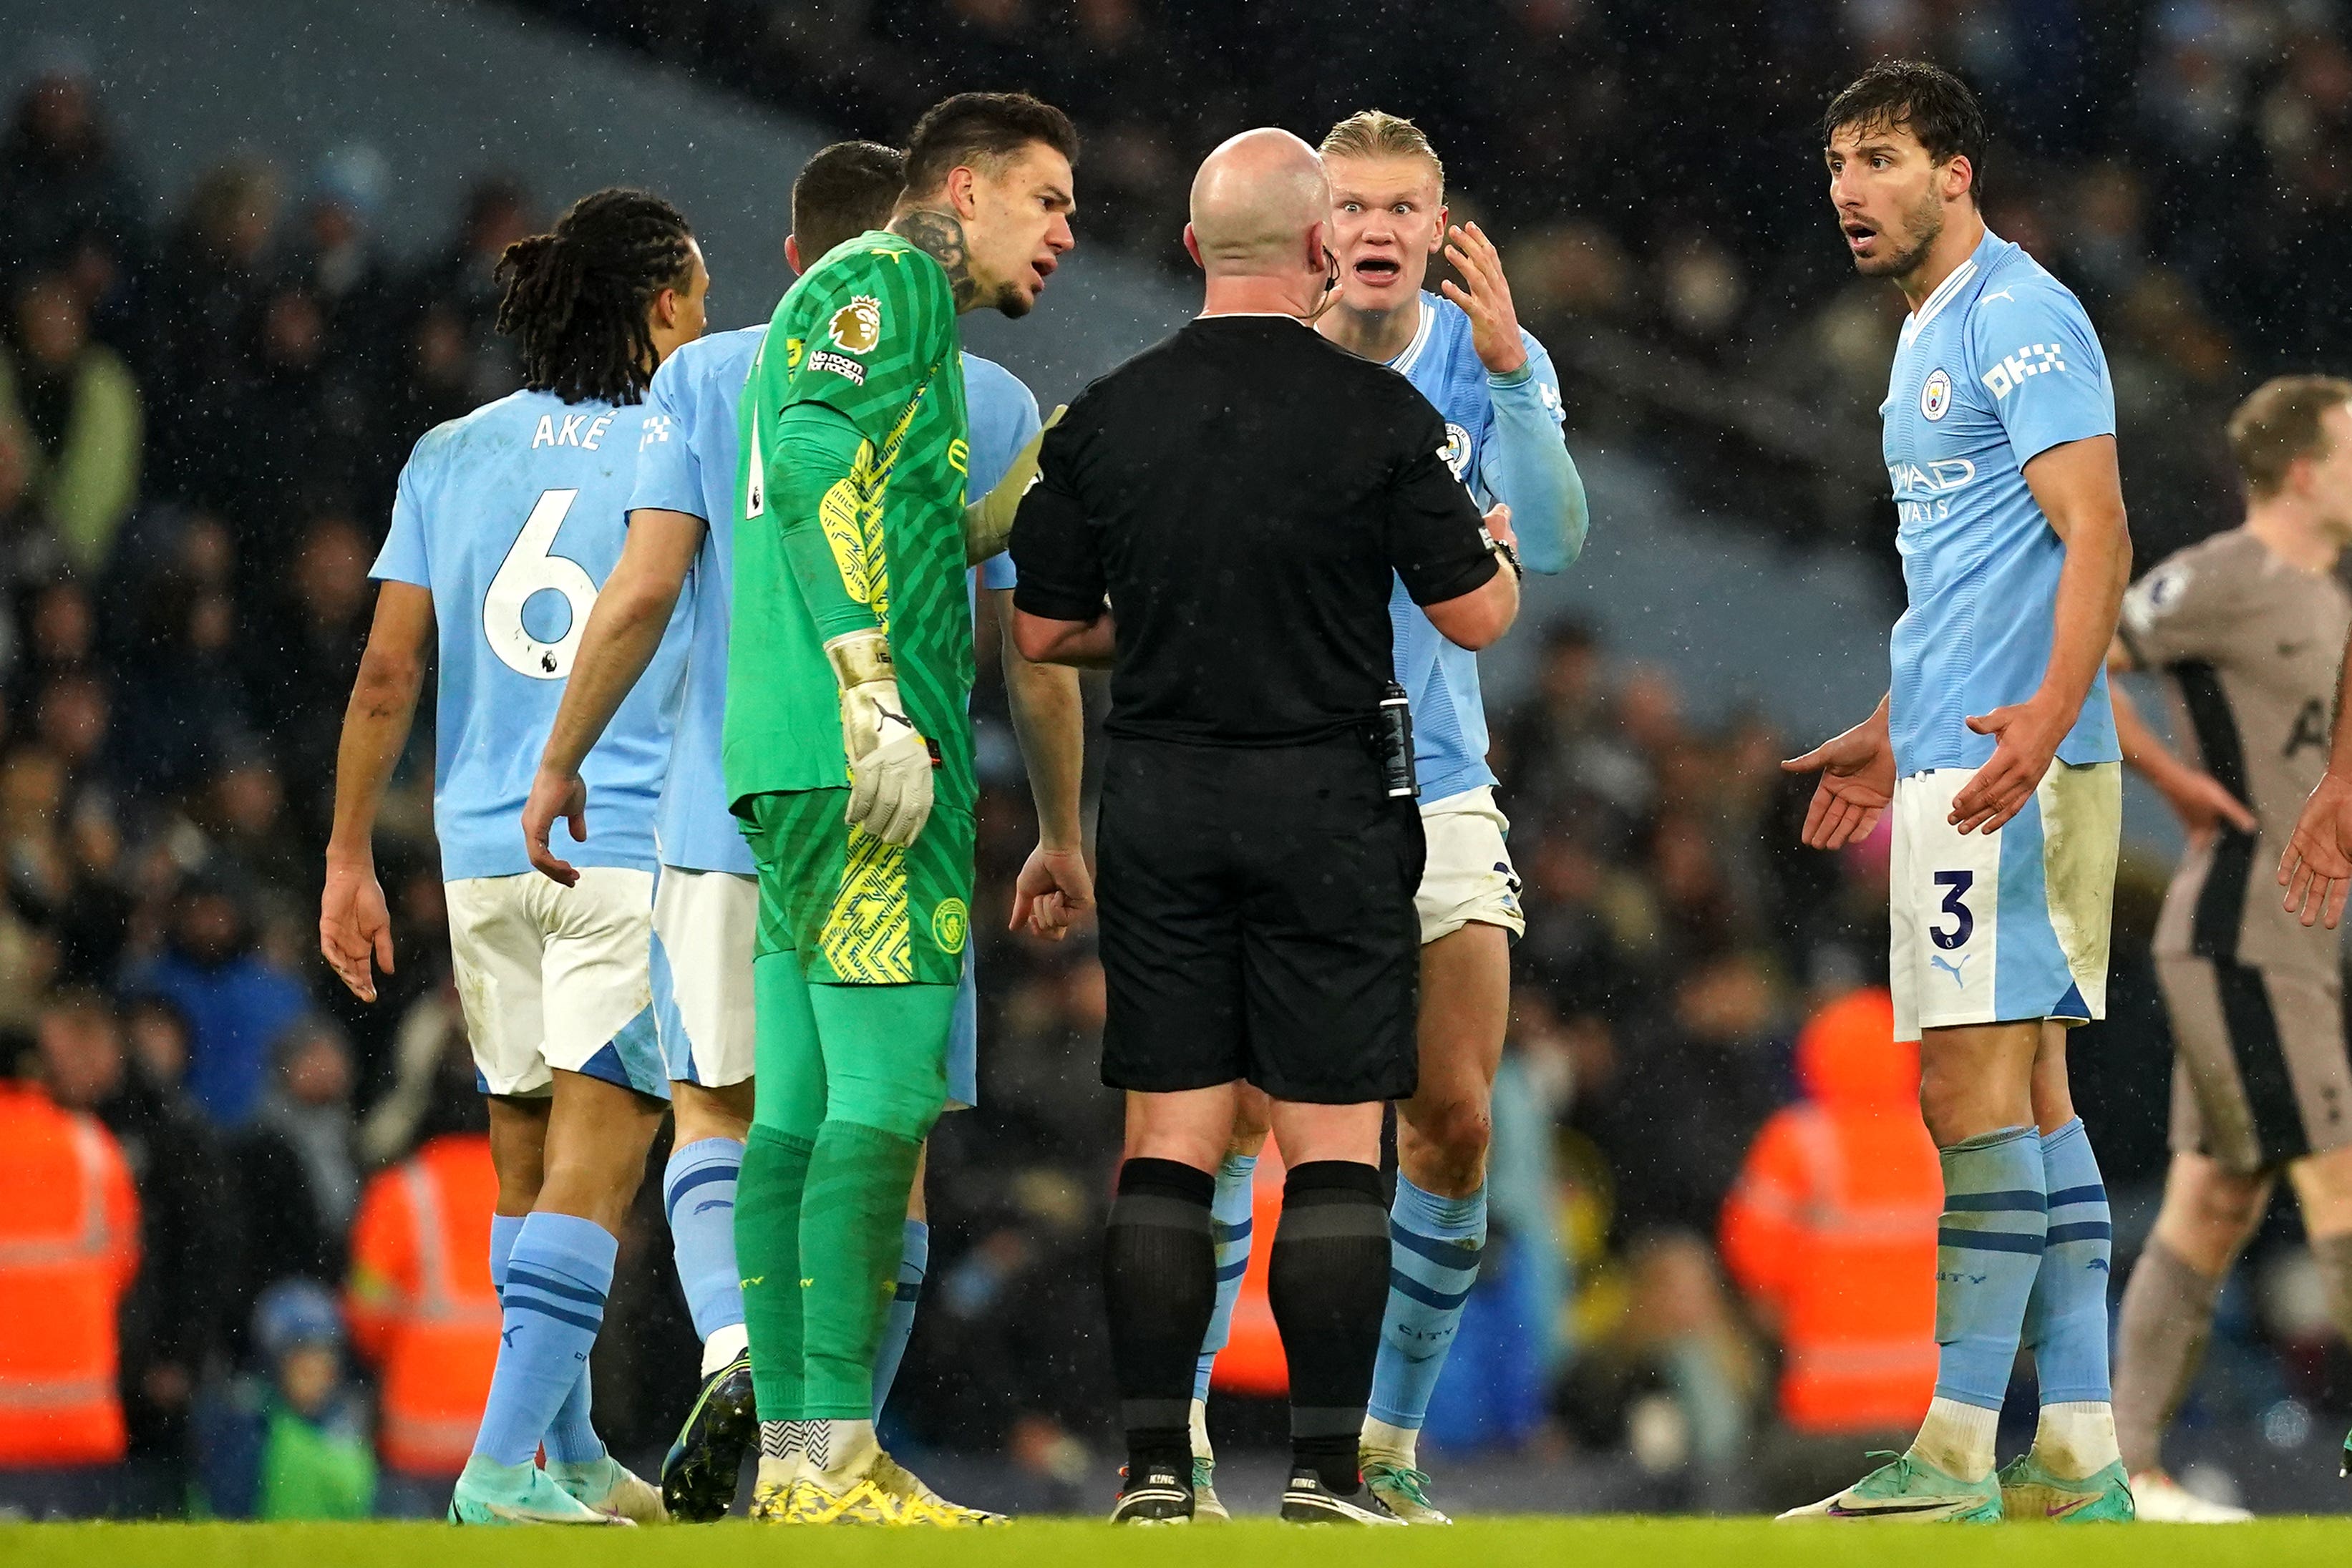 Man City surrounded the referee after he refused to play advantage